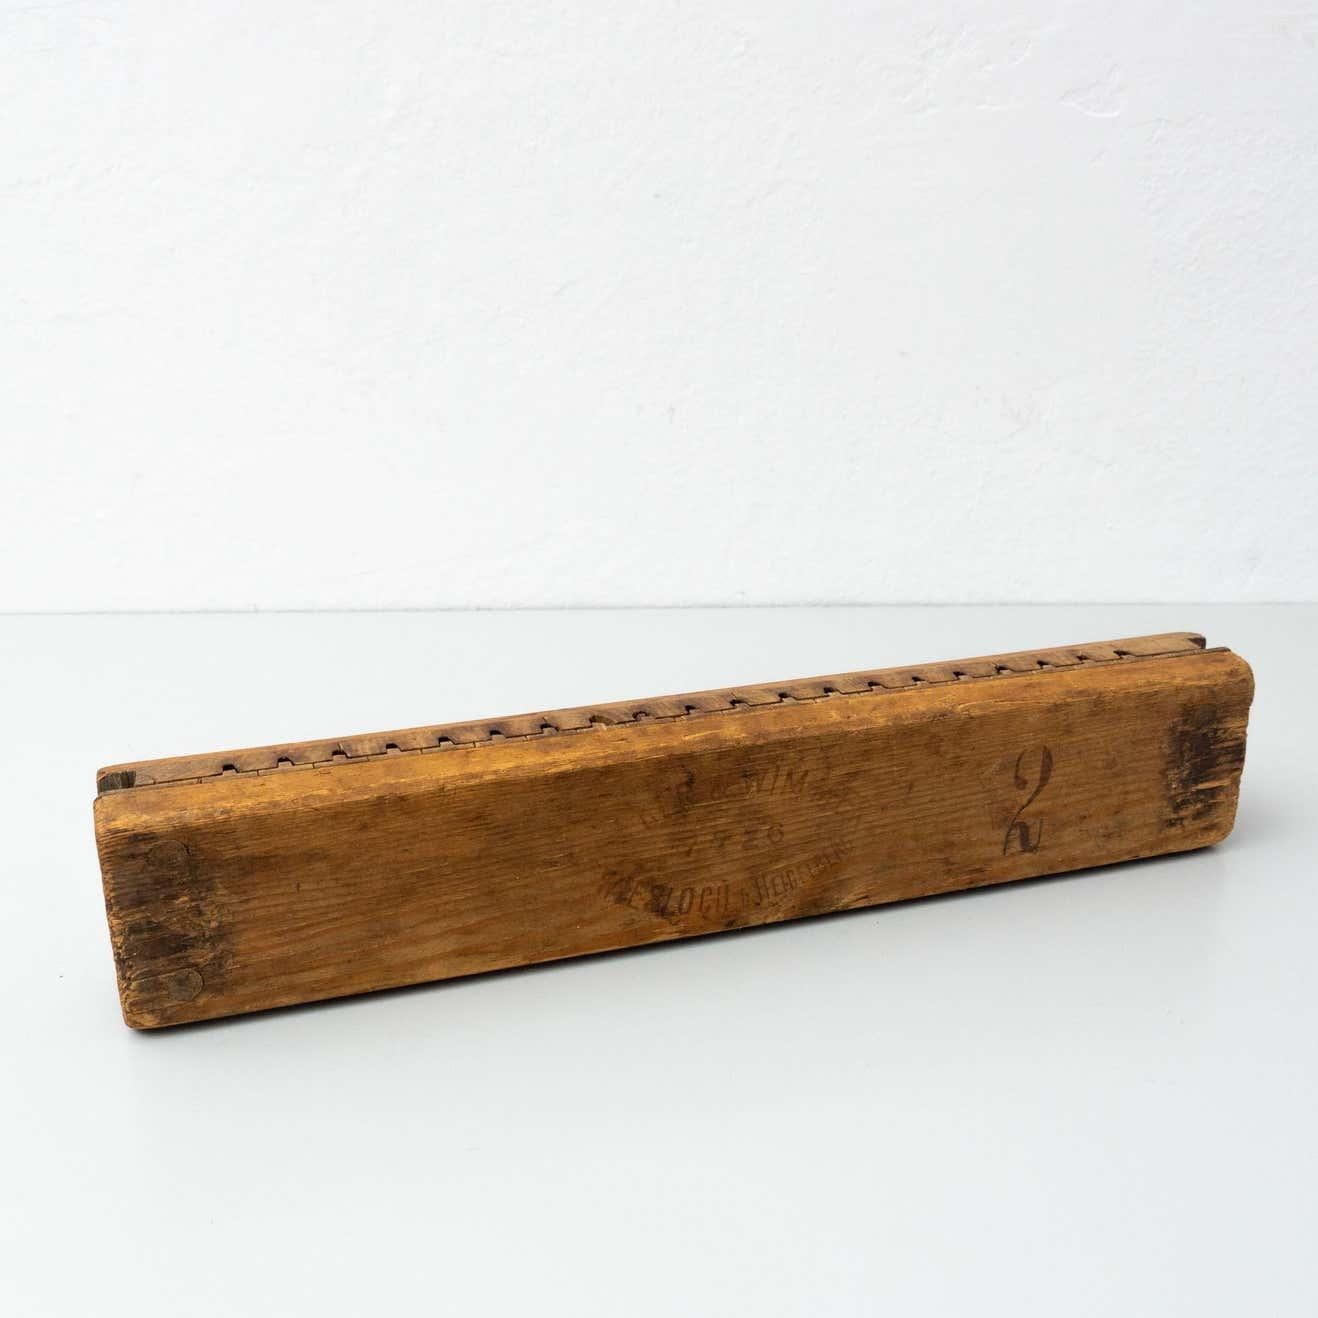 Antique traditional cigar holder.
By unknown manufacturer, circa 1950.

In original condition, with minor wear consistent with age and use, preserving a beautiful patina.

Materials:
Wood

Dimensions:
D 10 cm x W 56 cm x H 6.5 cm.